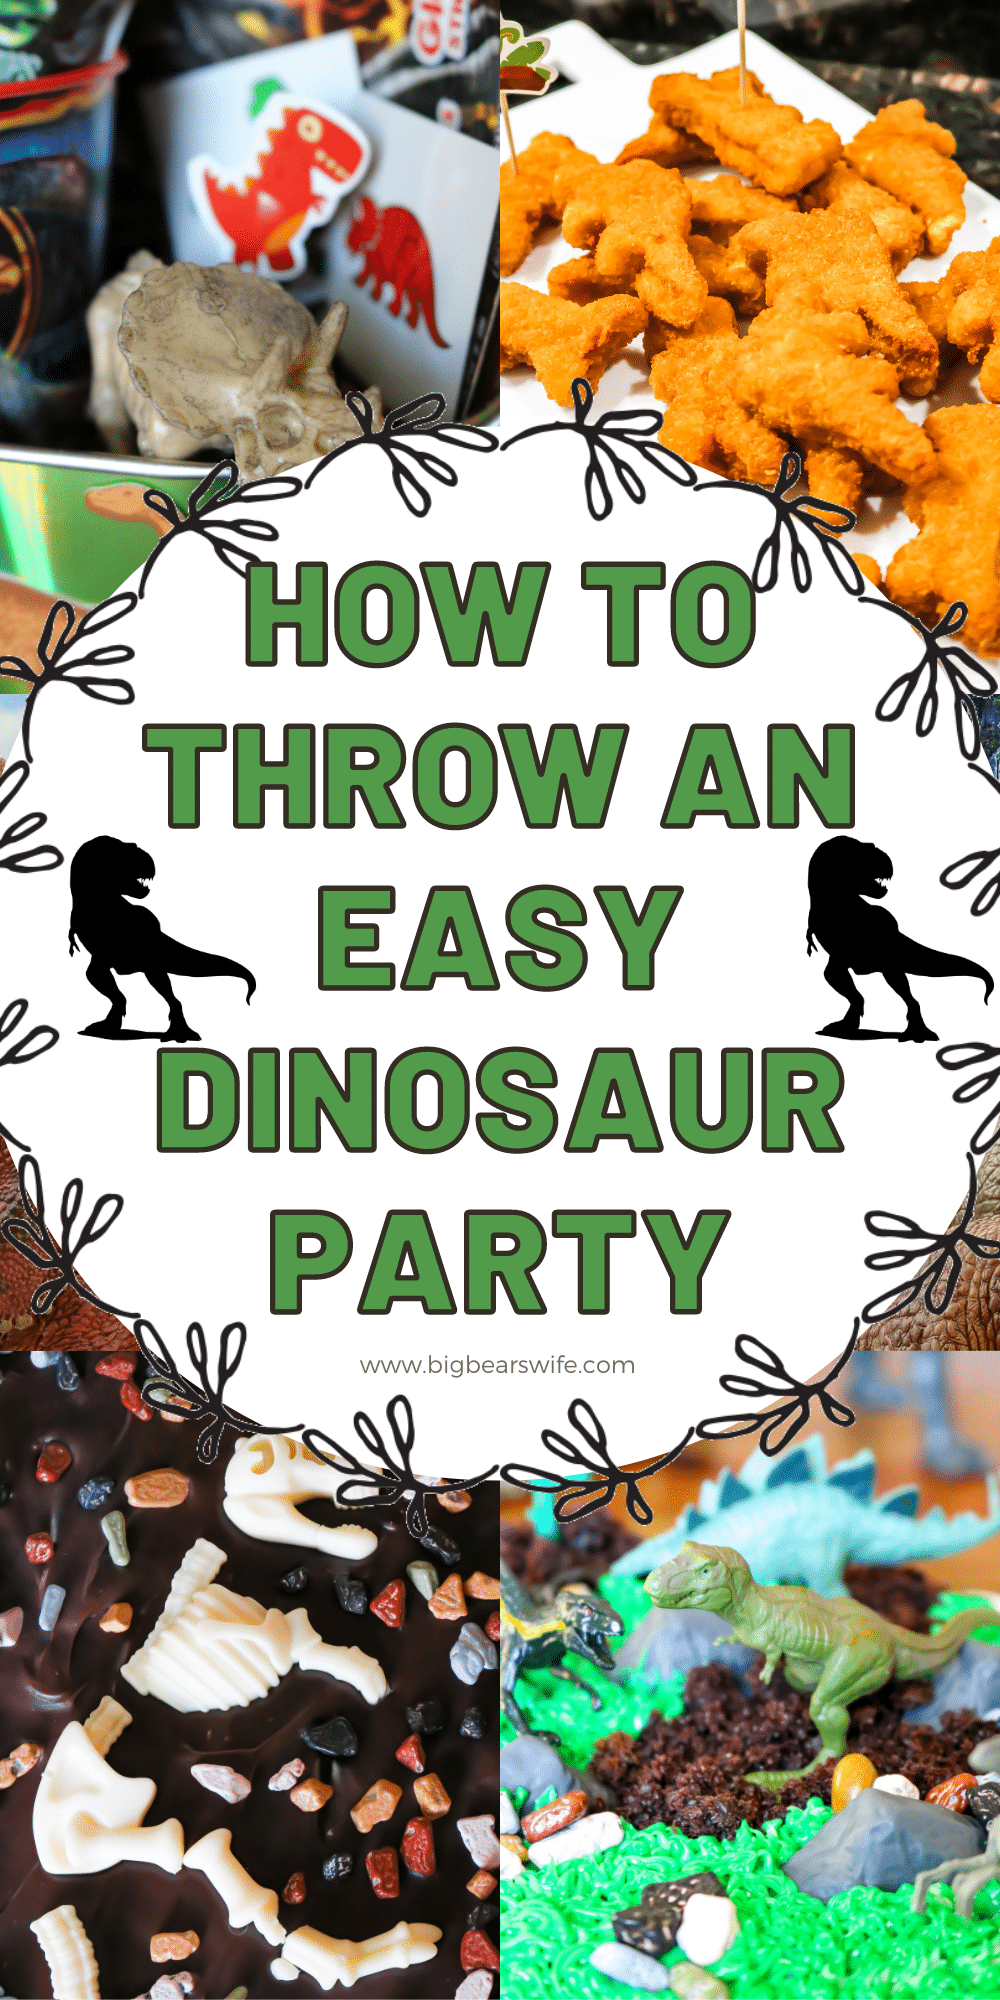 Planning on throwing a fun Dinosaur Party? We've got some fun Dinosaur party decorations, dino party foods and party favor ideas that will help you throw a great party without breaking the bank!  via @bigbearswife